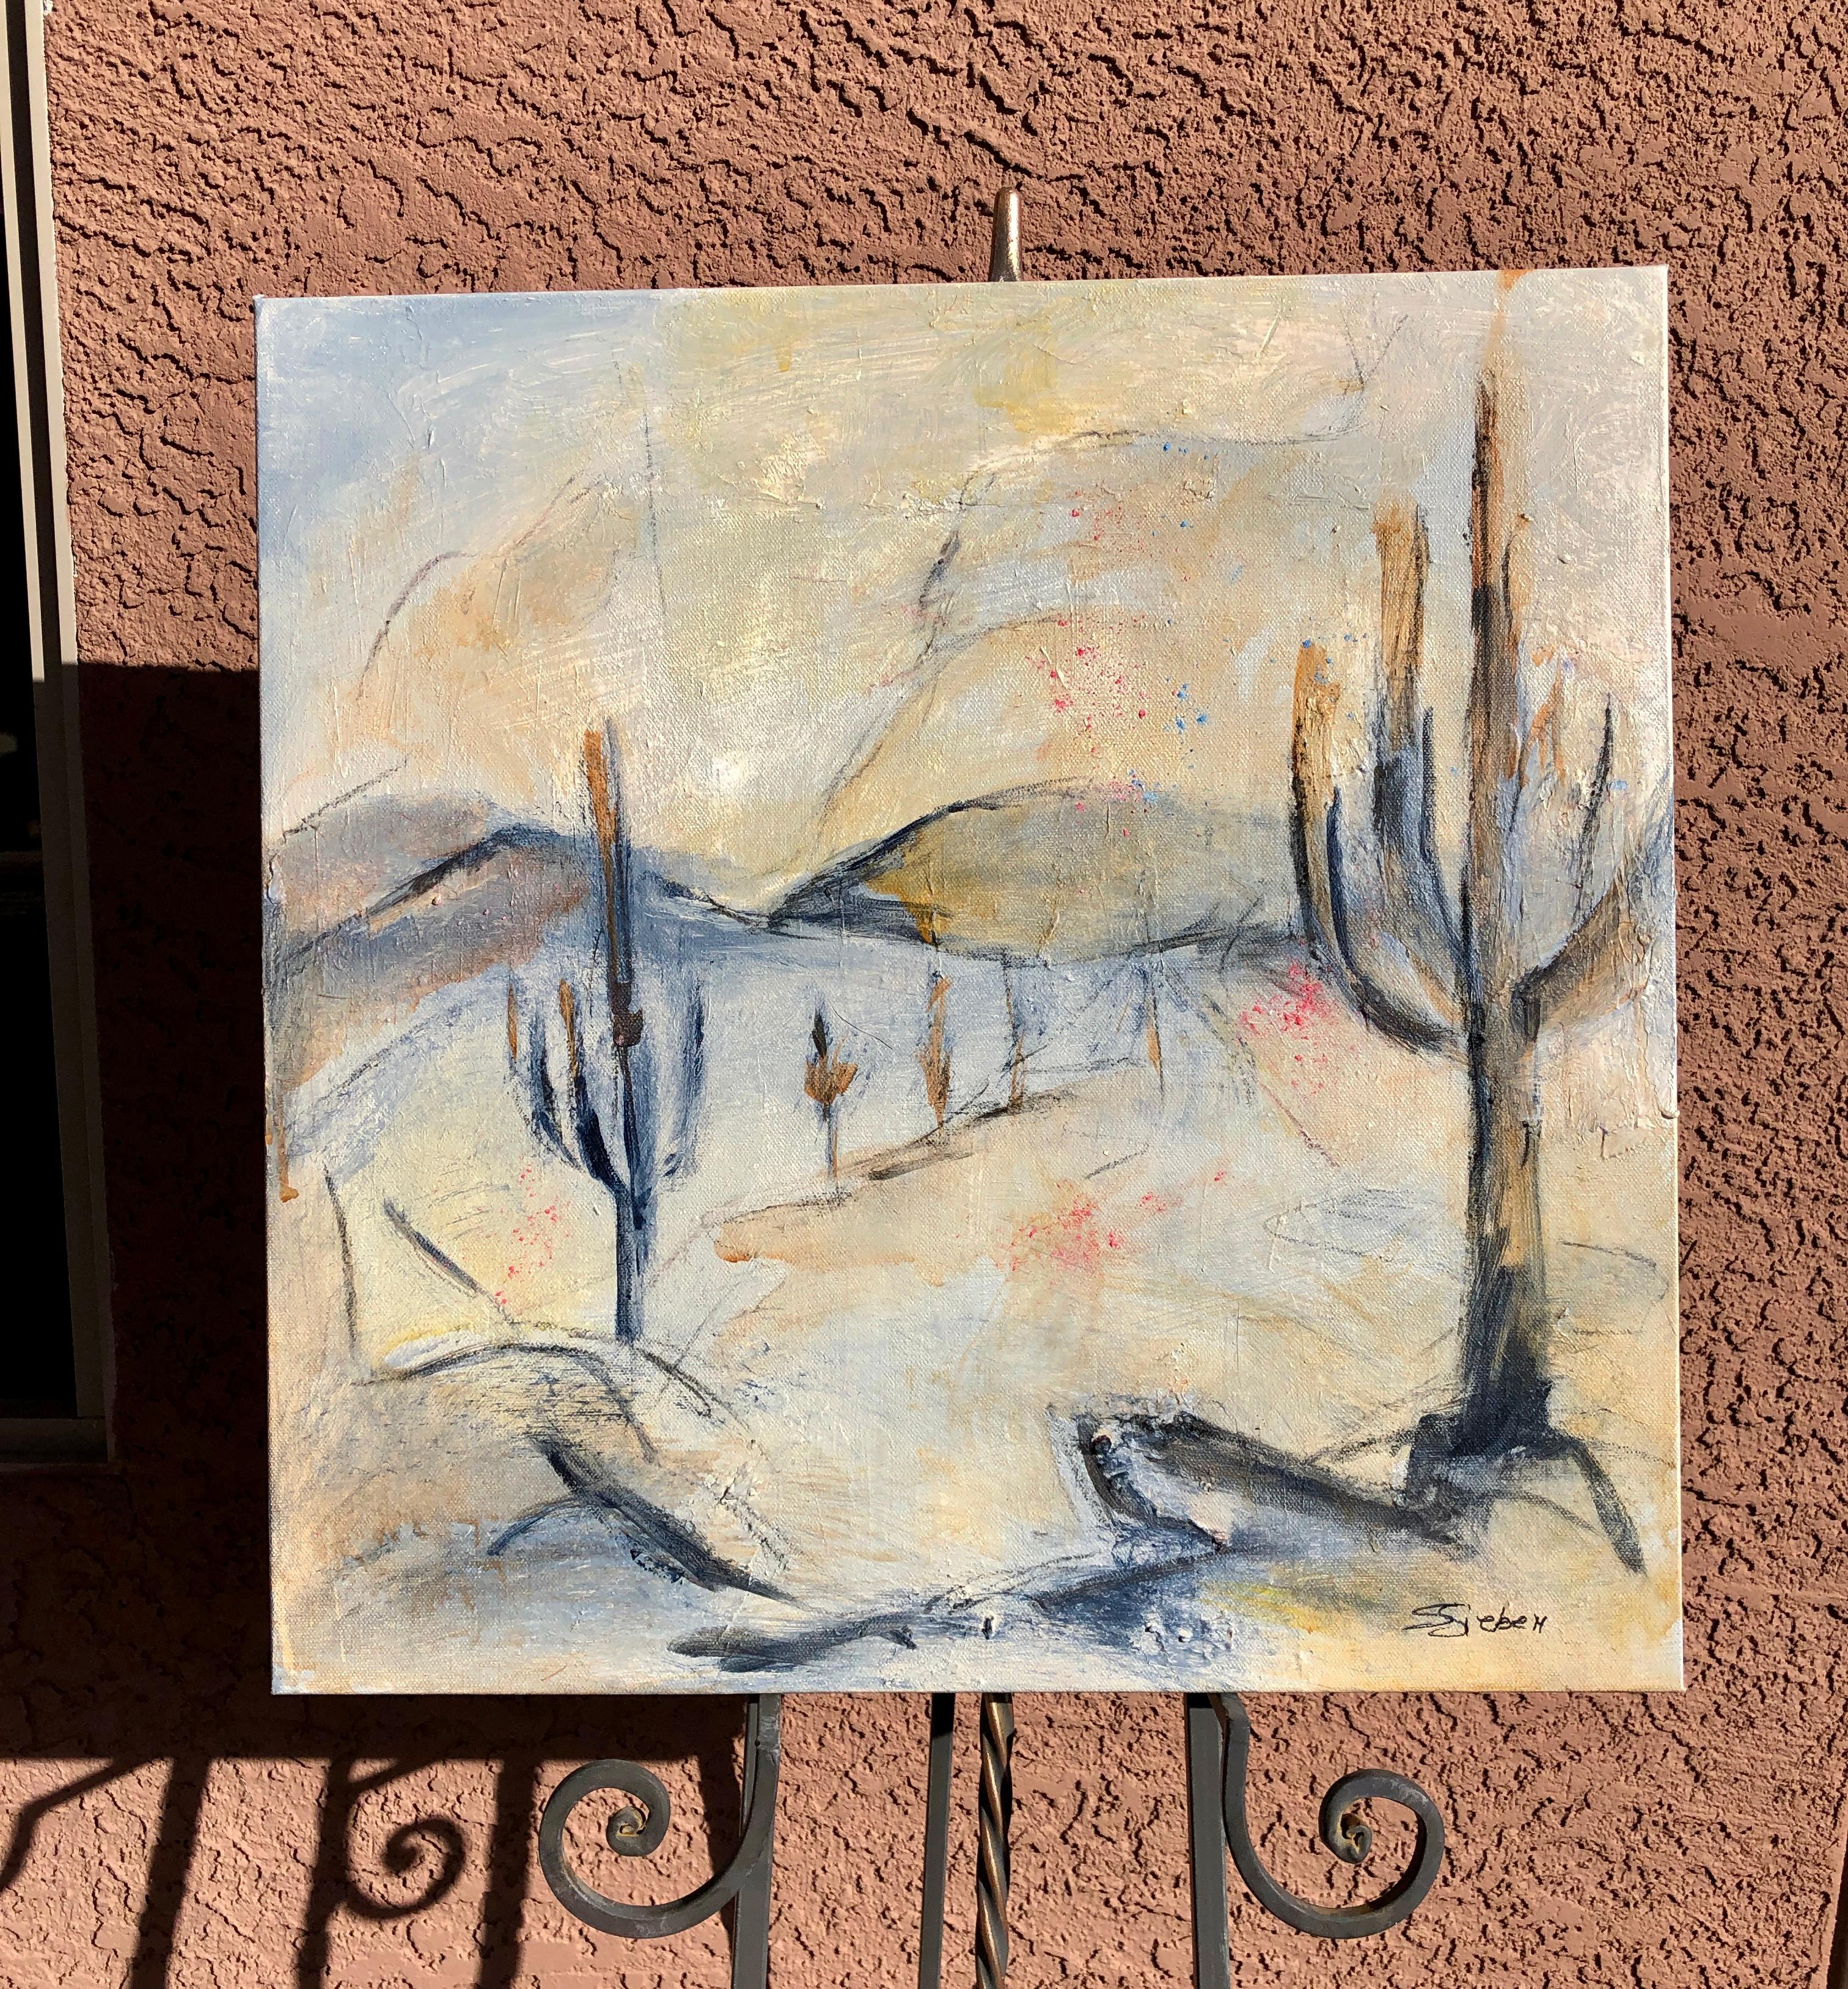 <p>Artist Comments<br>Artist Sharon Sieben depicts the tall giants of the Sonoran Desert. Swift brushstrokes reveal the hot and arid landscape with steep dunes and gentle slopes. Brawny saguaros stand solid on the sand creating subtle shadows around